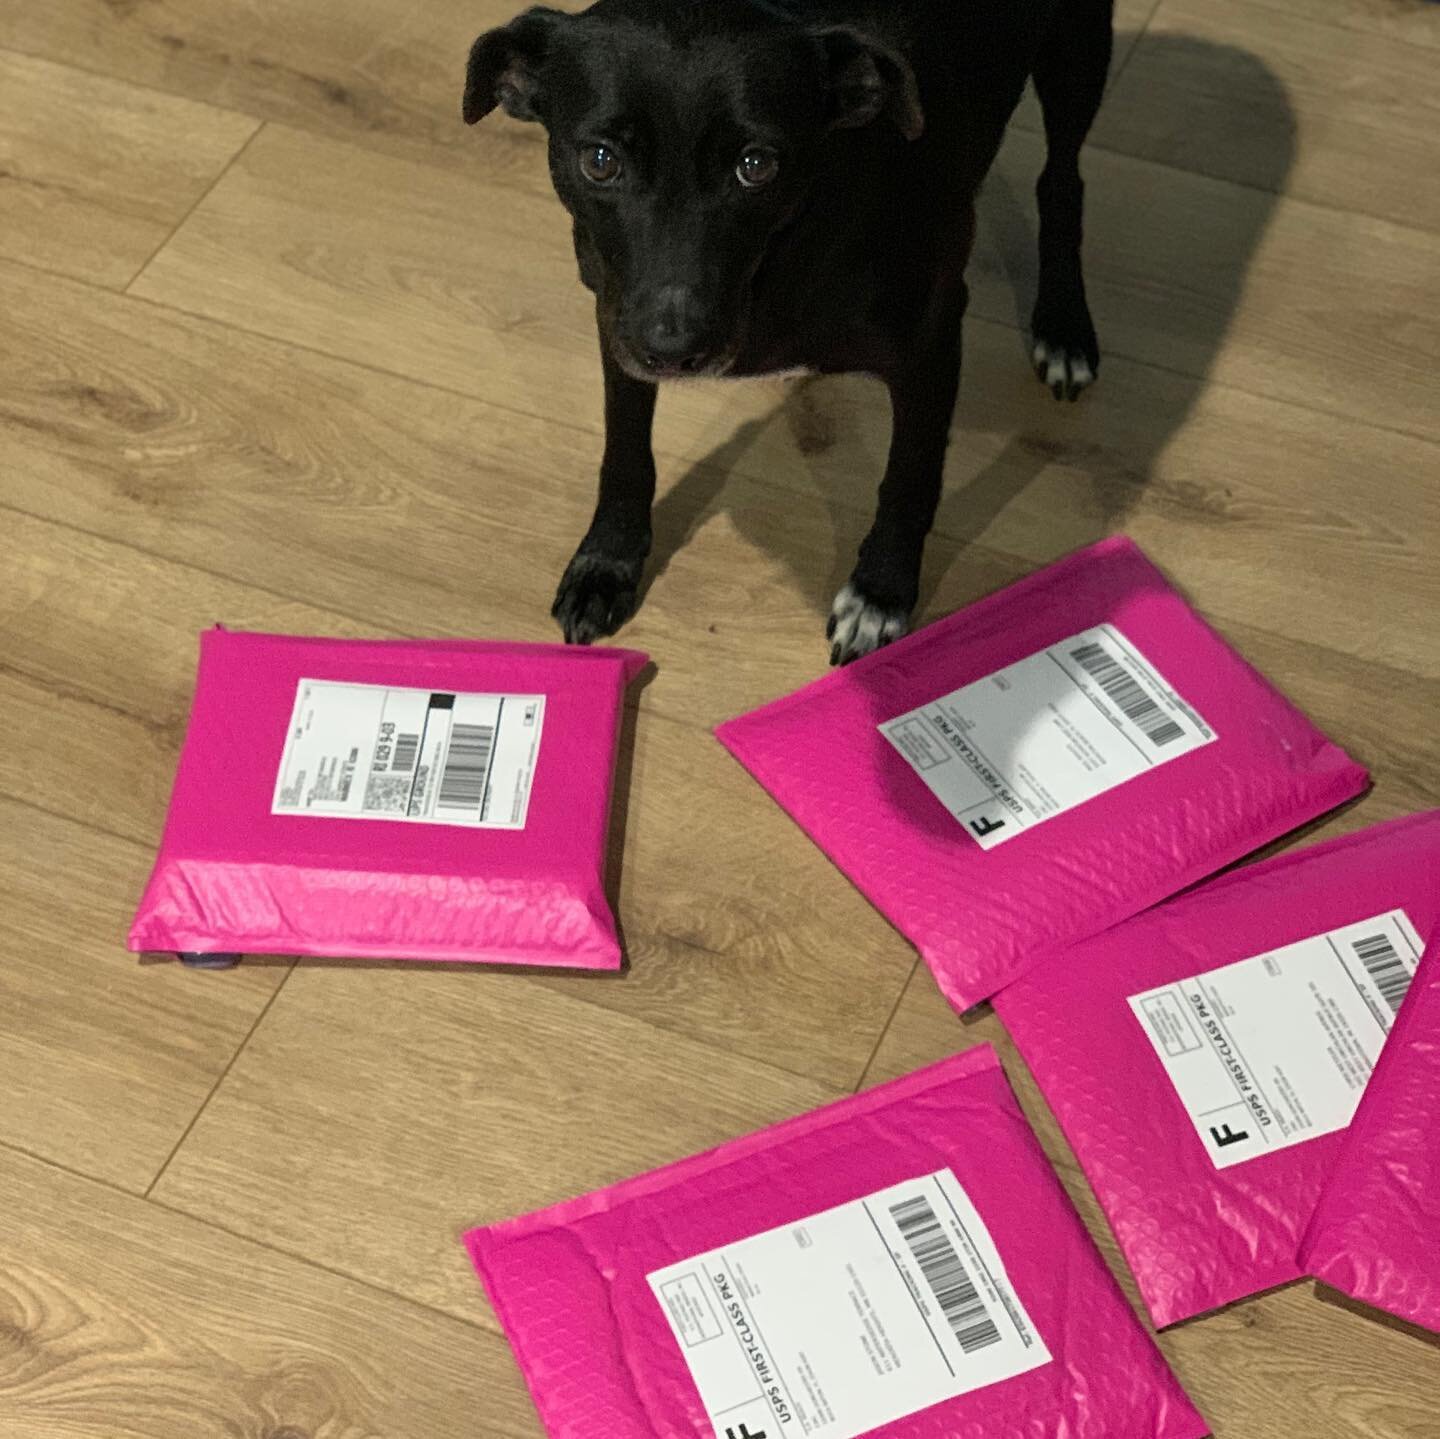 Tessie performing her quality inspection of the book orders shipping out today.  This means more donations for @100plusevergladesrescue !  We thank you and appreciate the support!  #tessieandlolasavethedogs #100plusabandoneddogs #booksofinstagram #mi